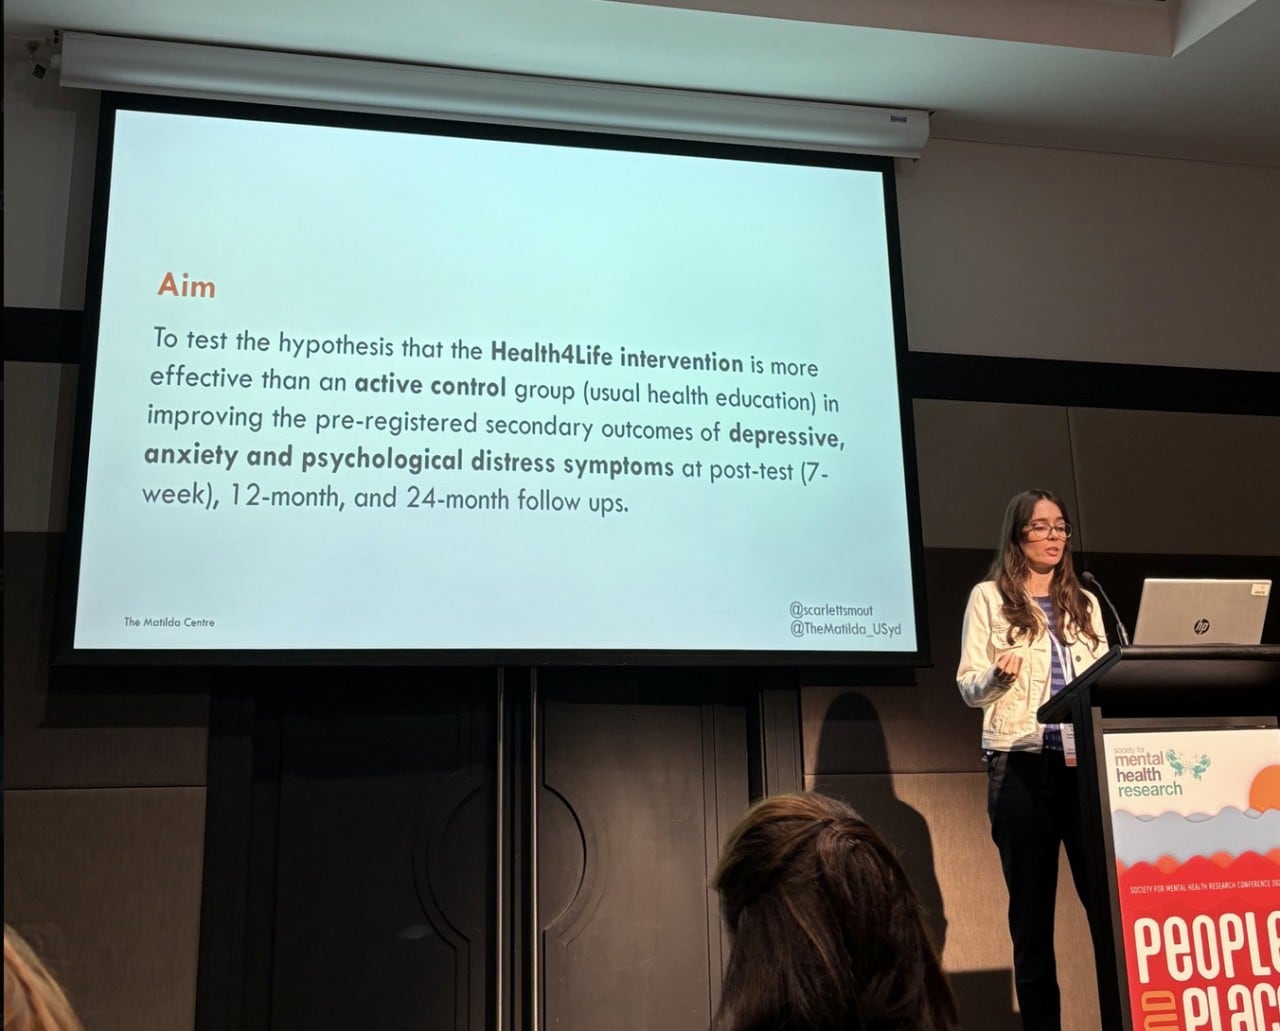 Scarlett presenting at SMHR. She is standing behind a podium and has a slide behind her, discussing the aims of the Health4Life program. 